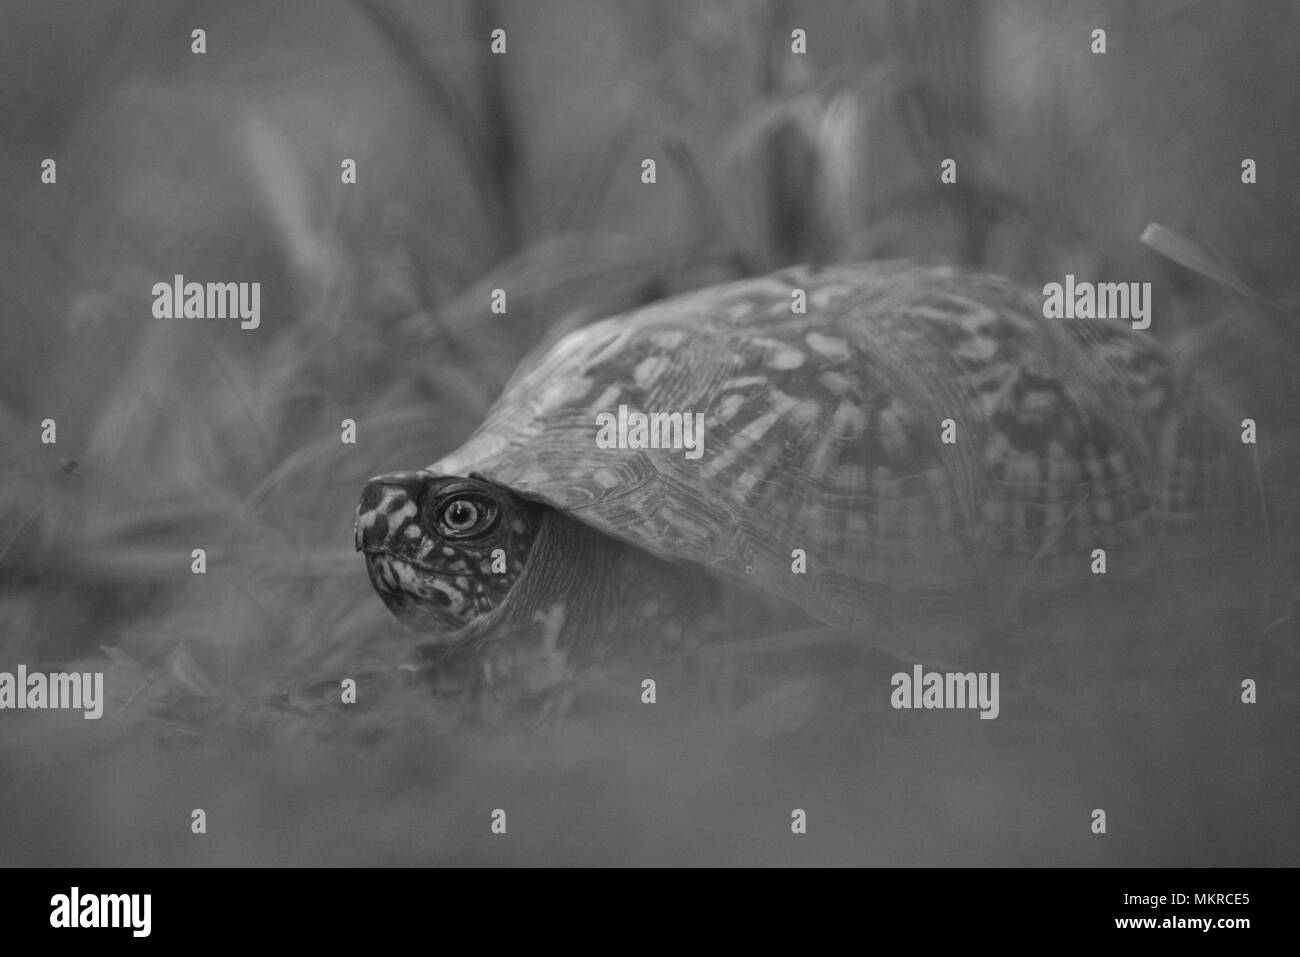 A common box turtle (Terrapene carolina) photographed at a low angle in long grass.  In black and white. Stock Photo